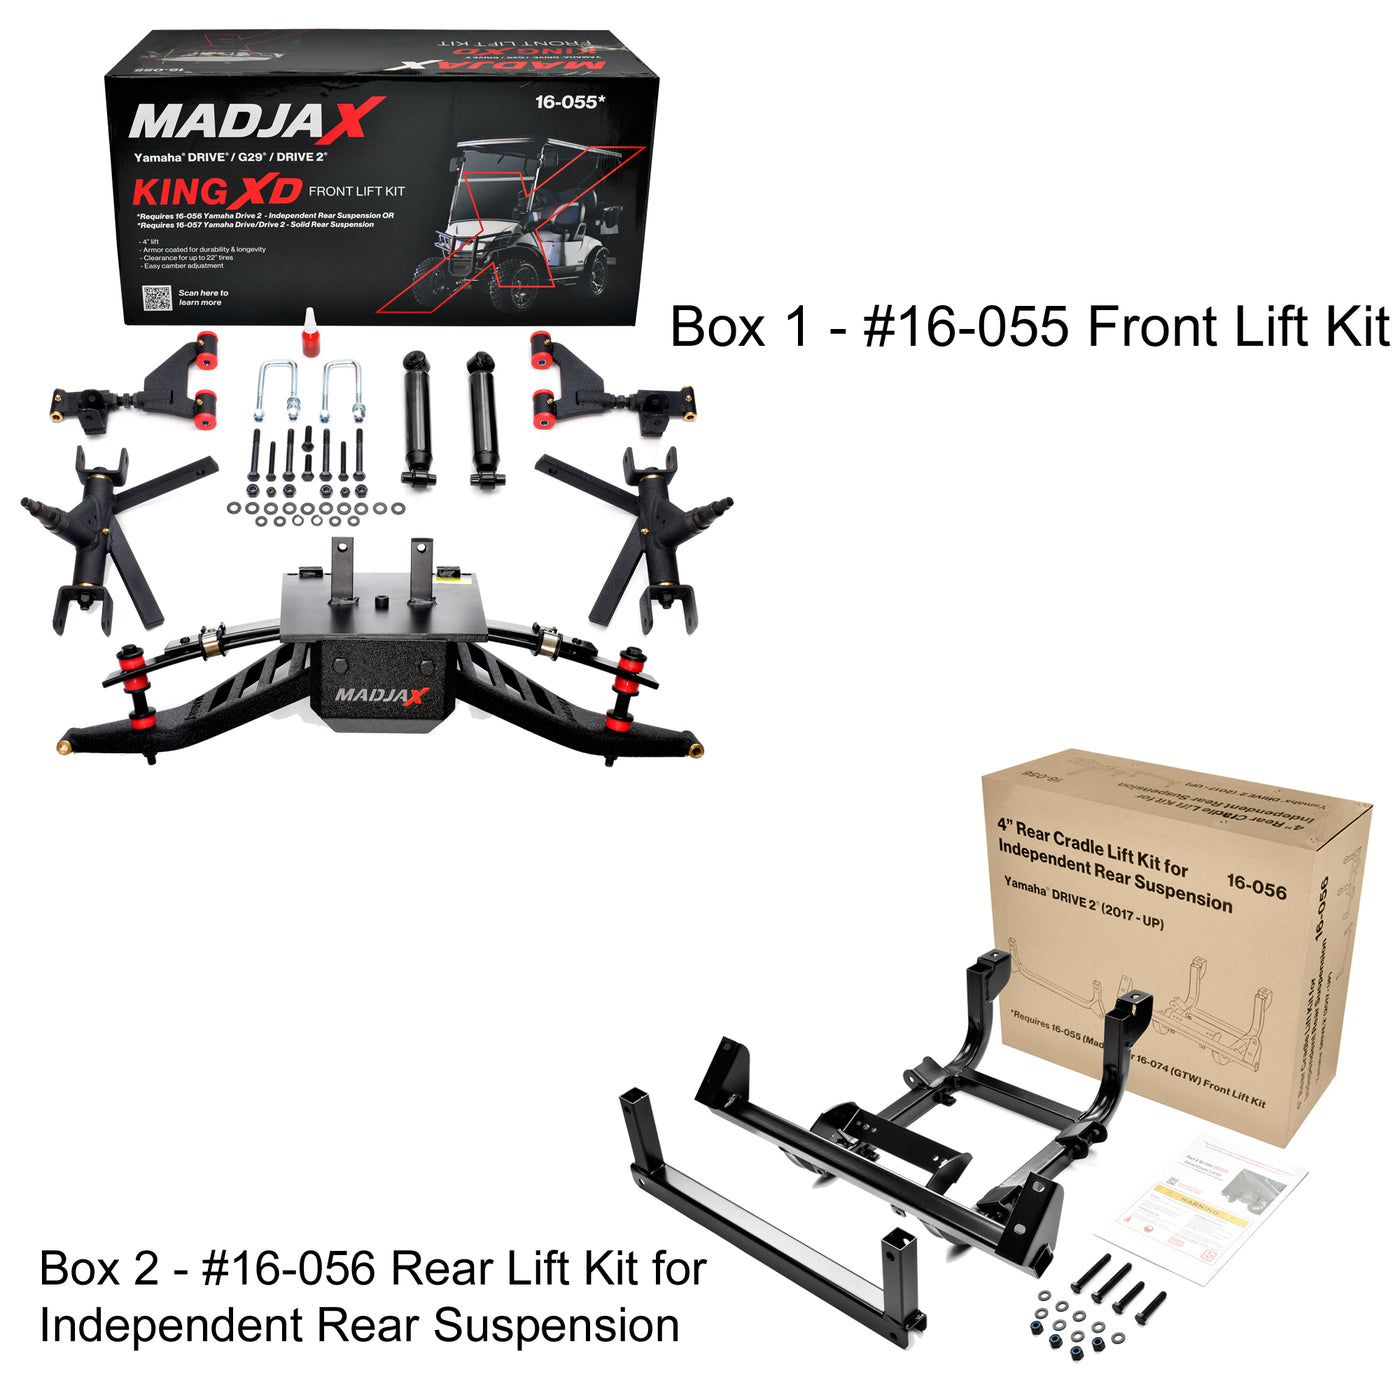 4" Madjax King XD Lift Kit for Yamaha G29/Drive/Drive2 with Independent rear suspension